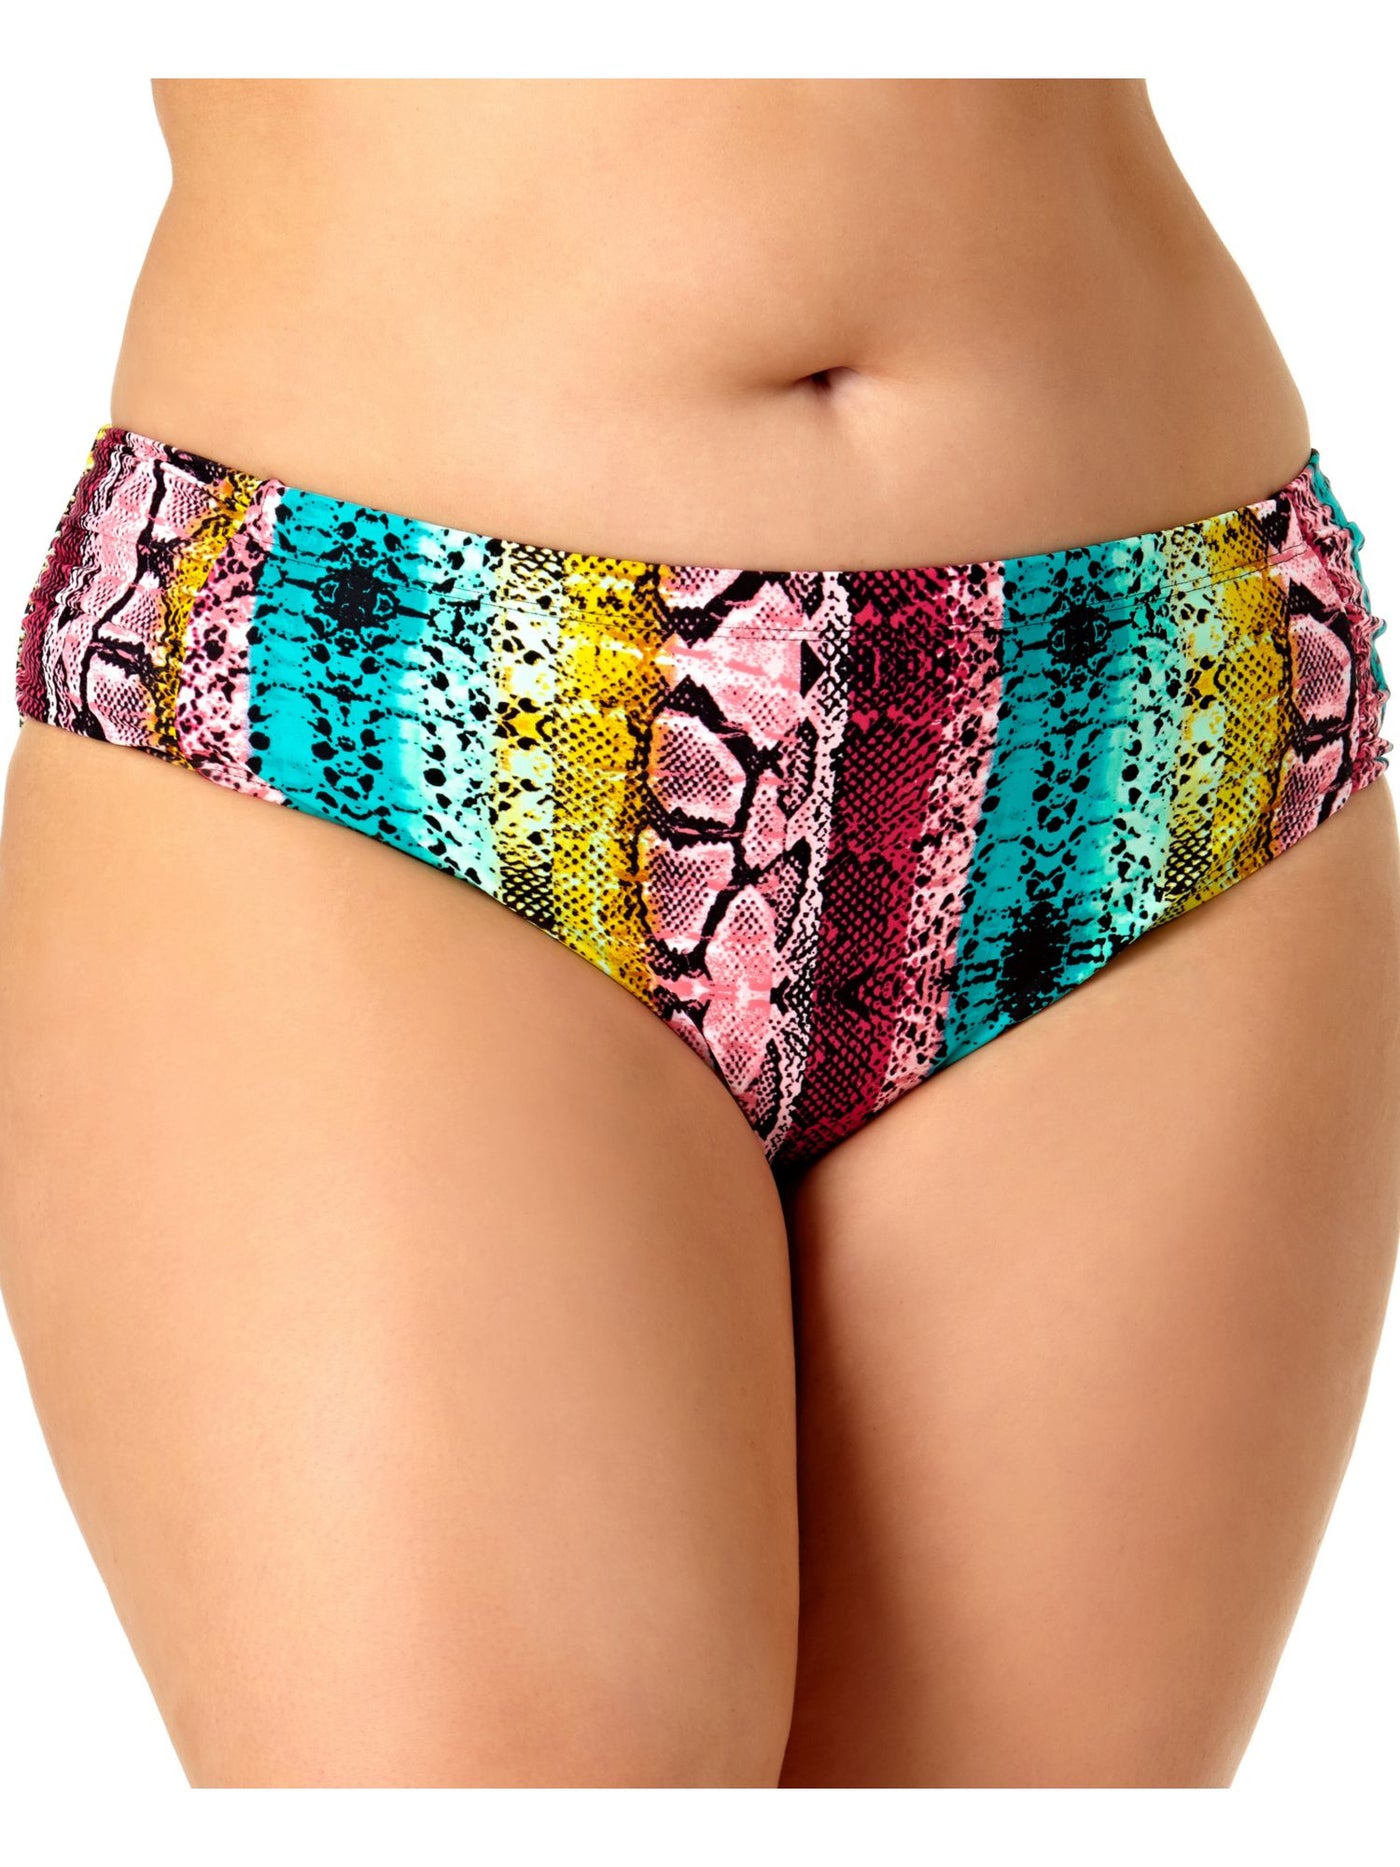 ALLURE Women's Multi Color Snake Print Stretch Lined Moderate Coverage Hipster Swimsuit Bottom 0 12-14